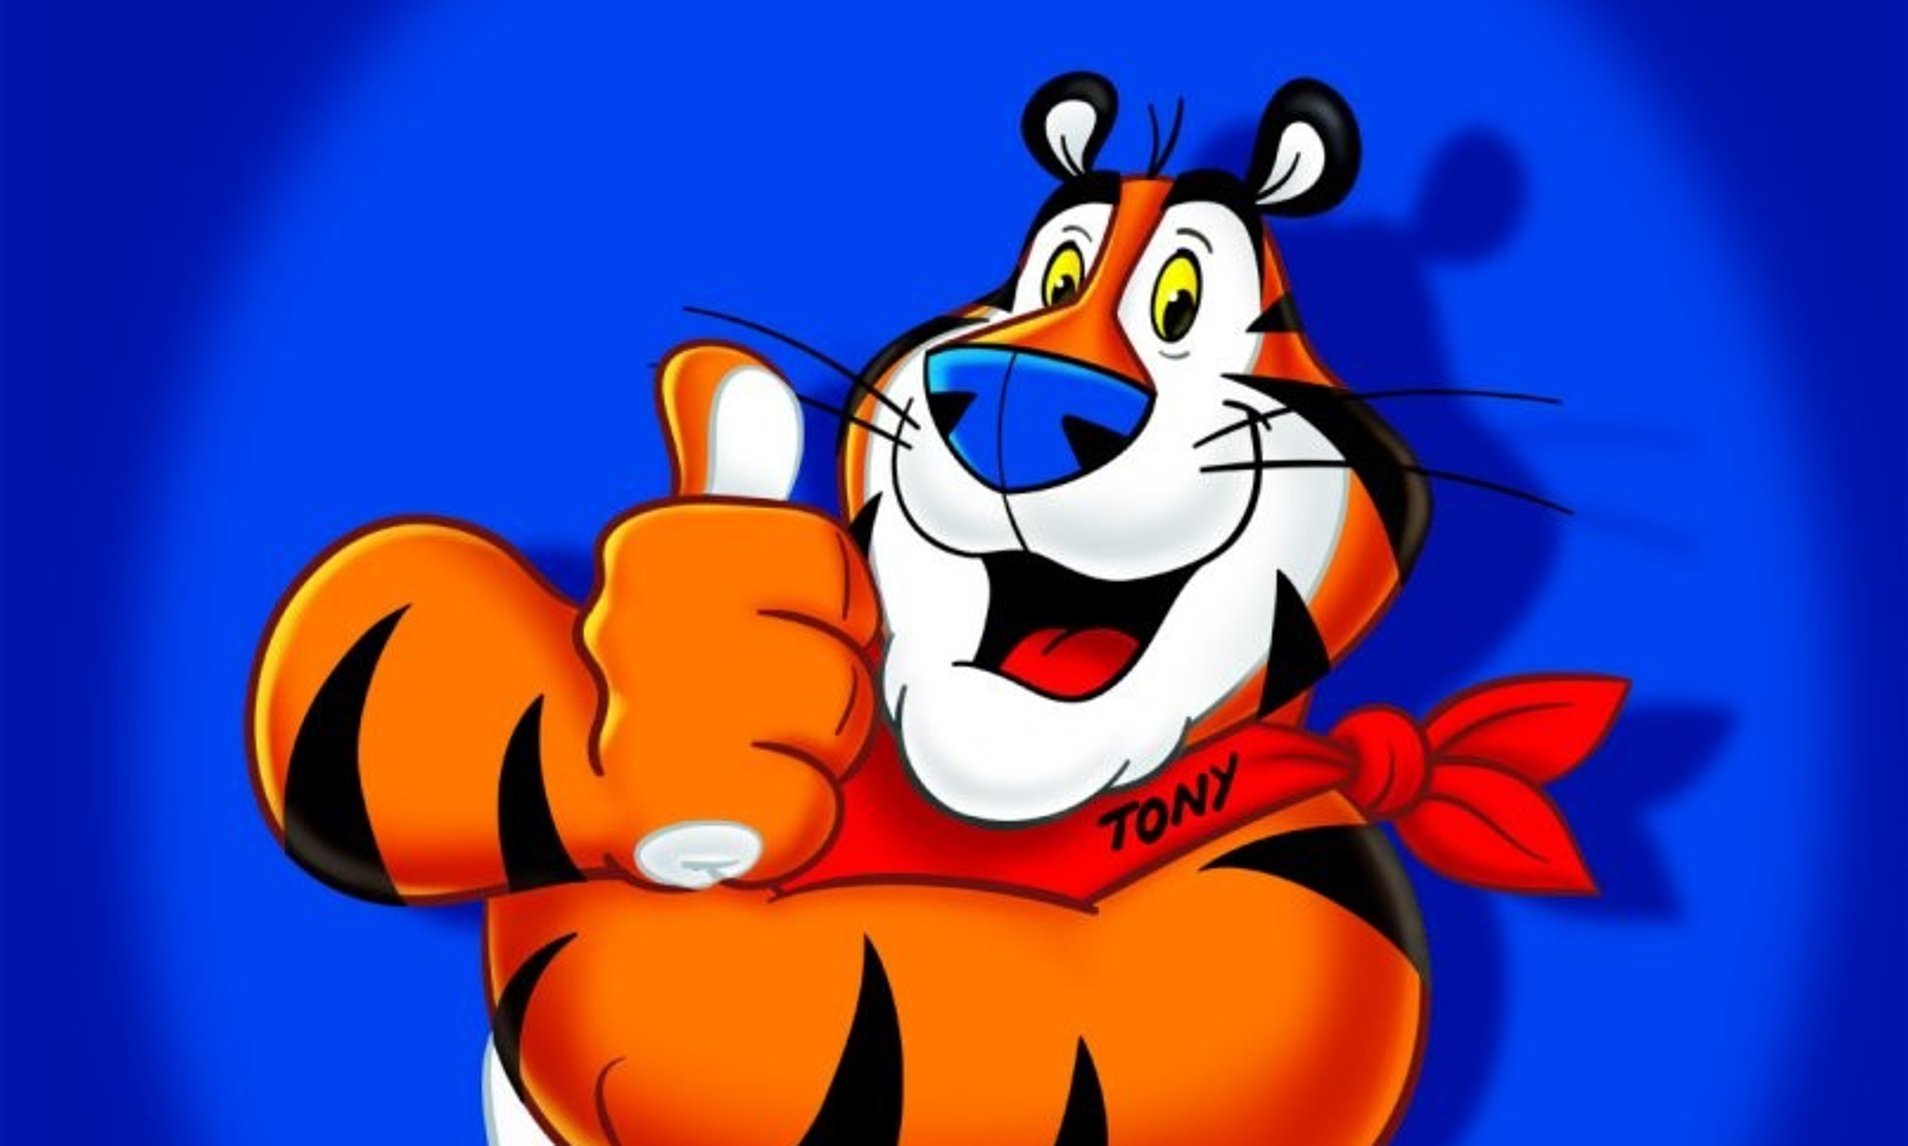 No "Tony The Tiger" memes have been featured yet. 